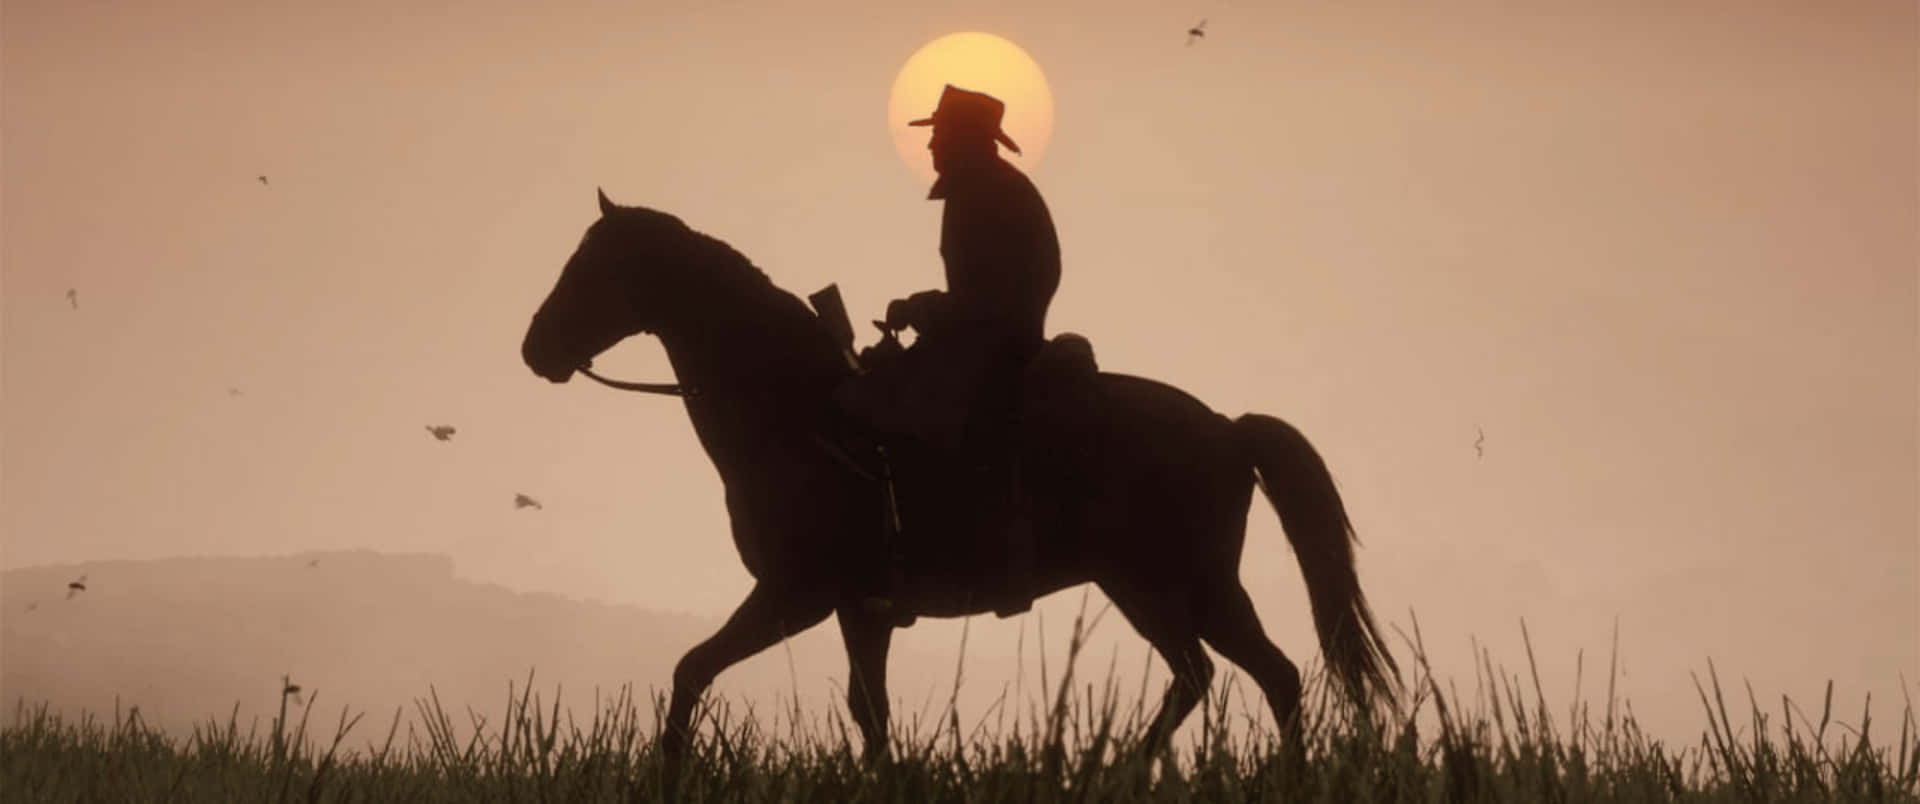 3440x1440p Red Dead Redemption 2 Background Move Background